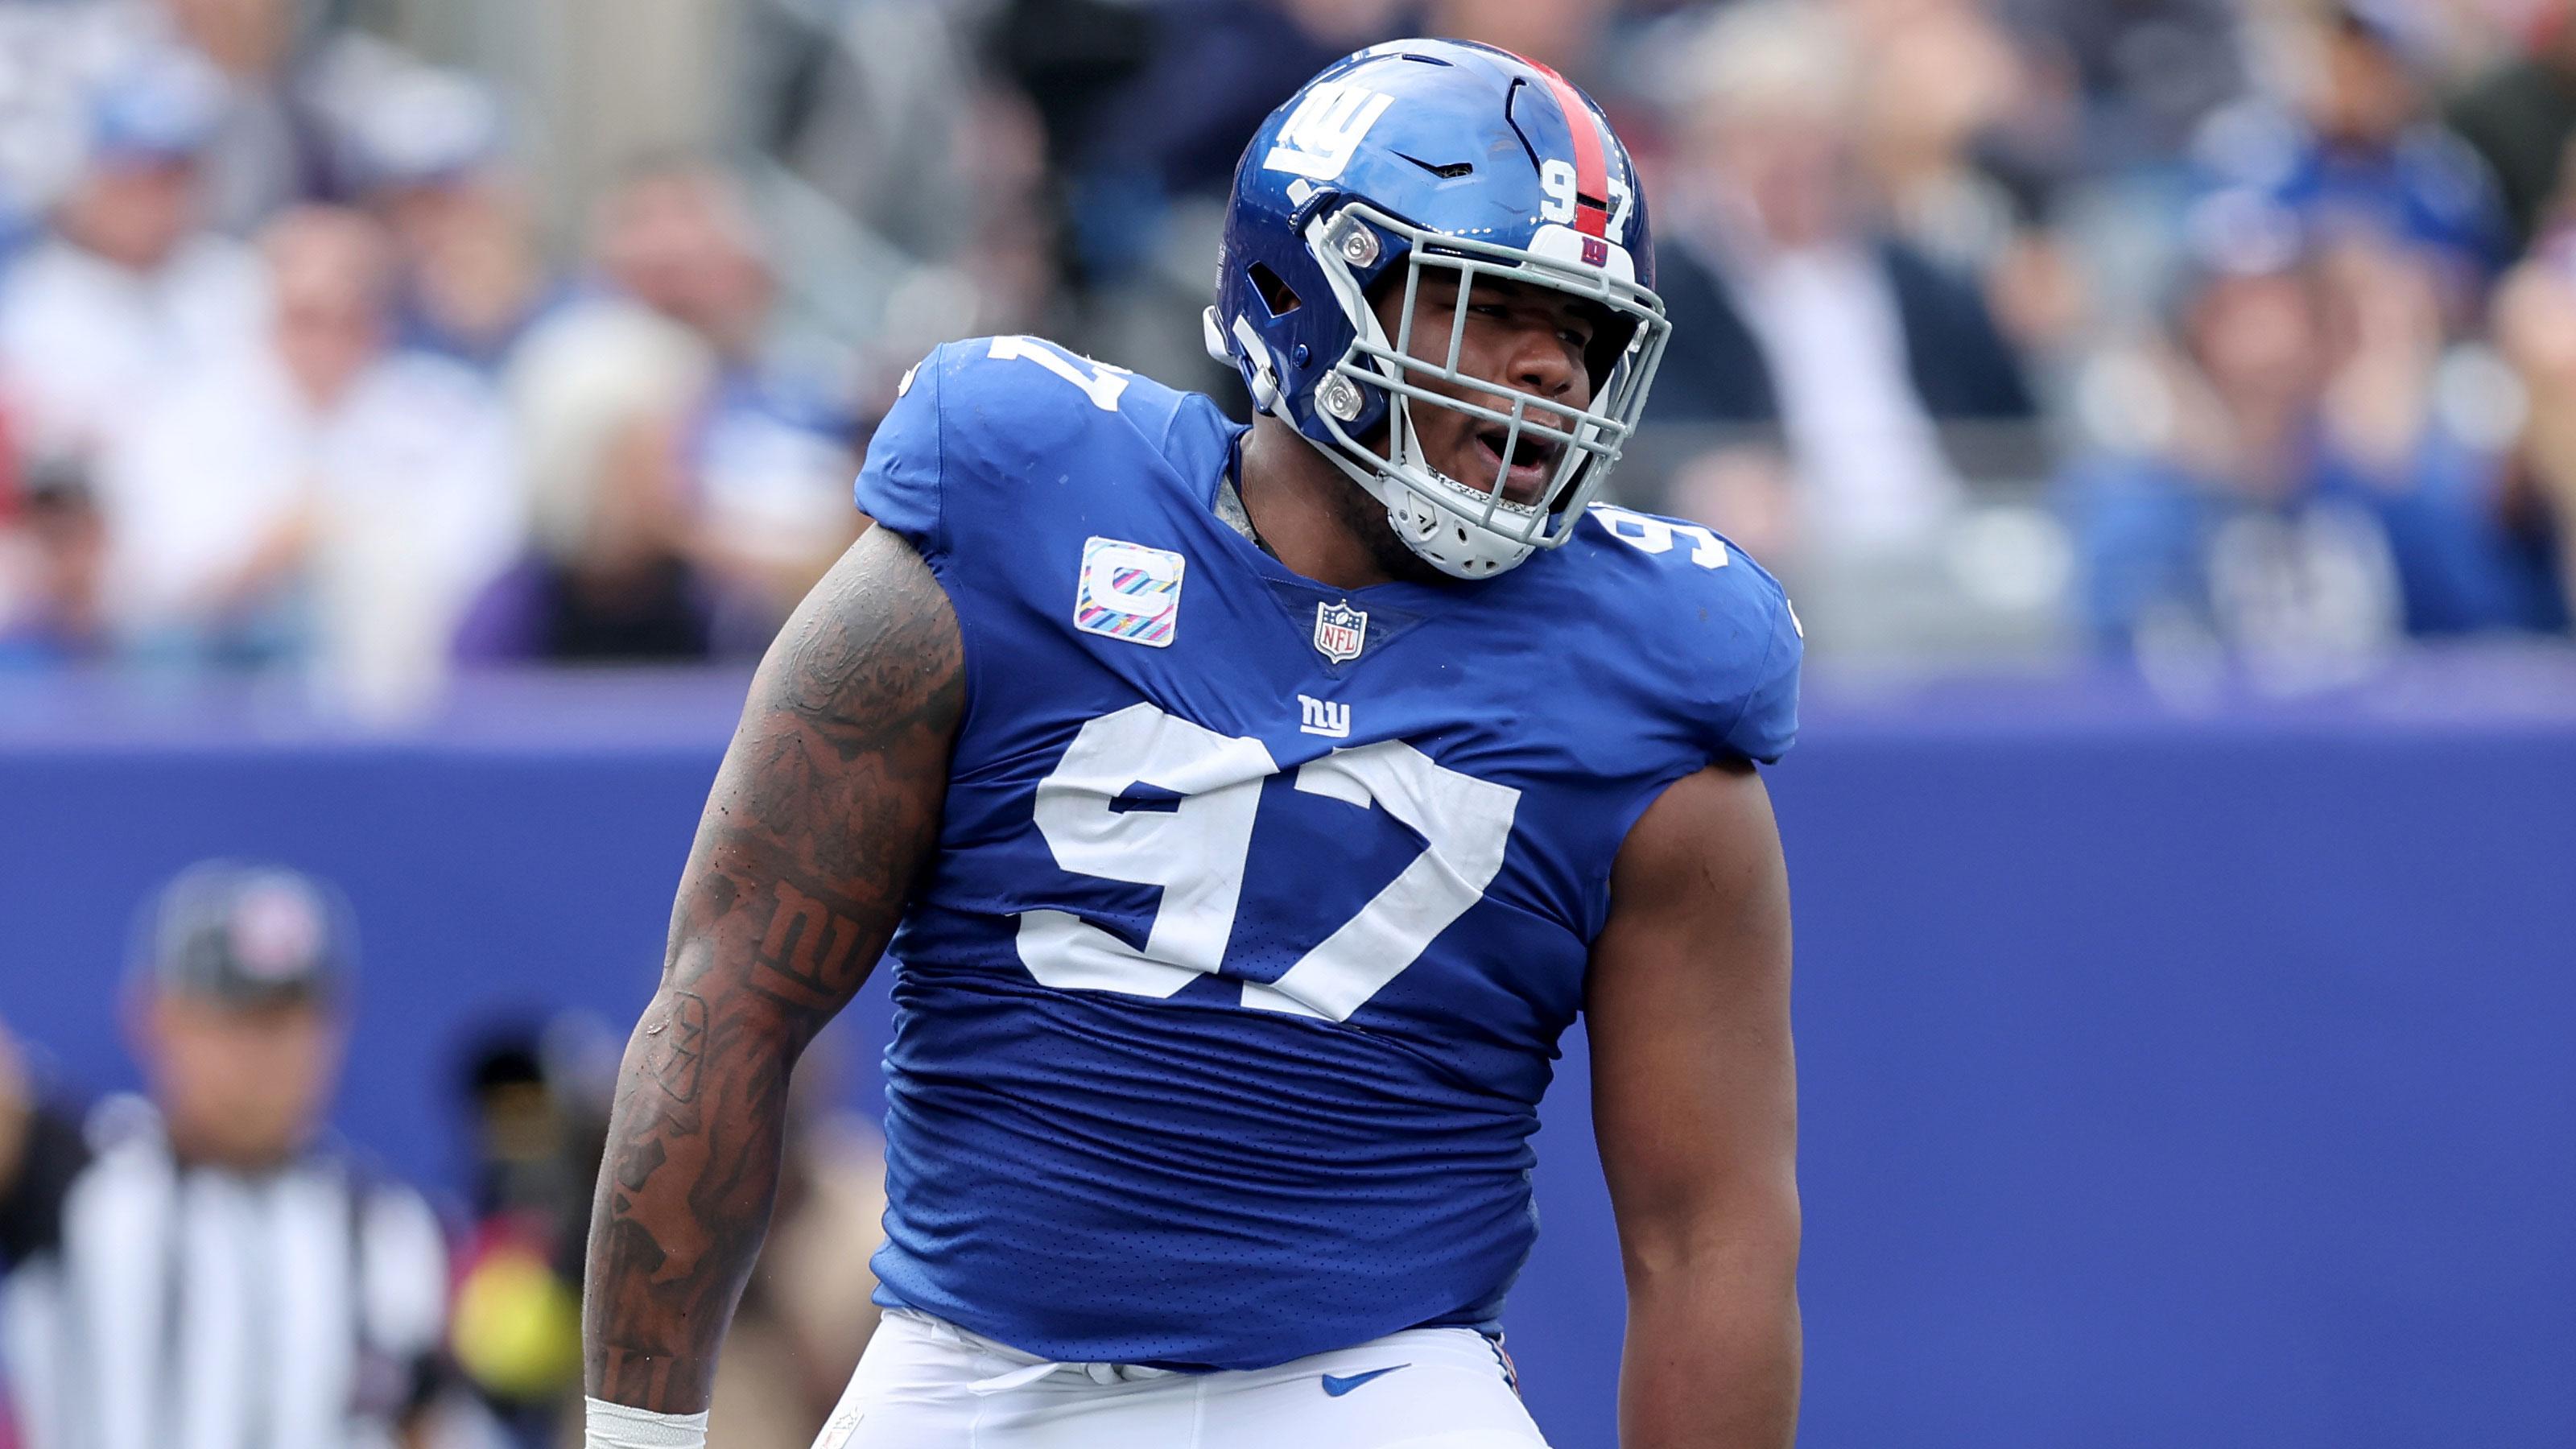 Oct 16, 2022; East Rutherford, New Jersey, USA; New York Giants defensive tackle Dexter Lawrence (97) celebrates a sack against the Baltimore Ravens during the second quarter at MetLife Stadium. / Brad Penner-USA TODAY Sports